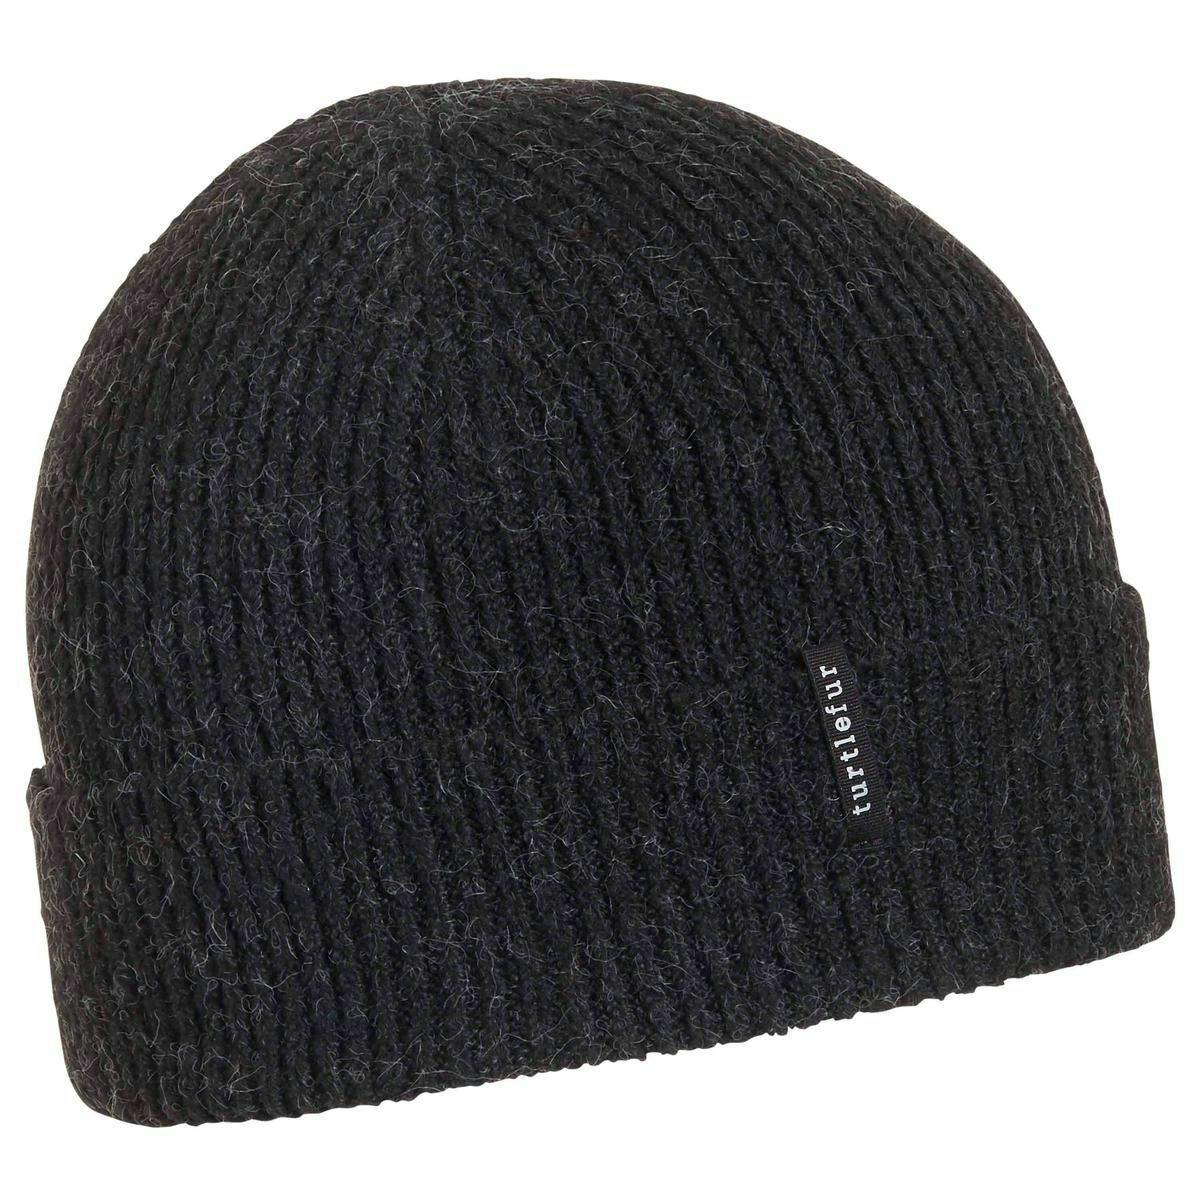 Turtle Fur - Recycled Williamsburg Watch Cap - One Size Black